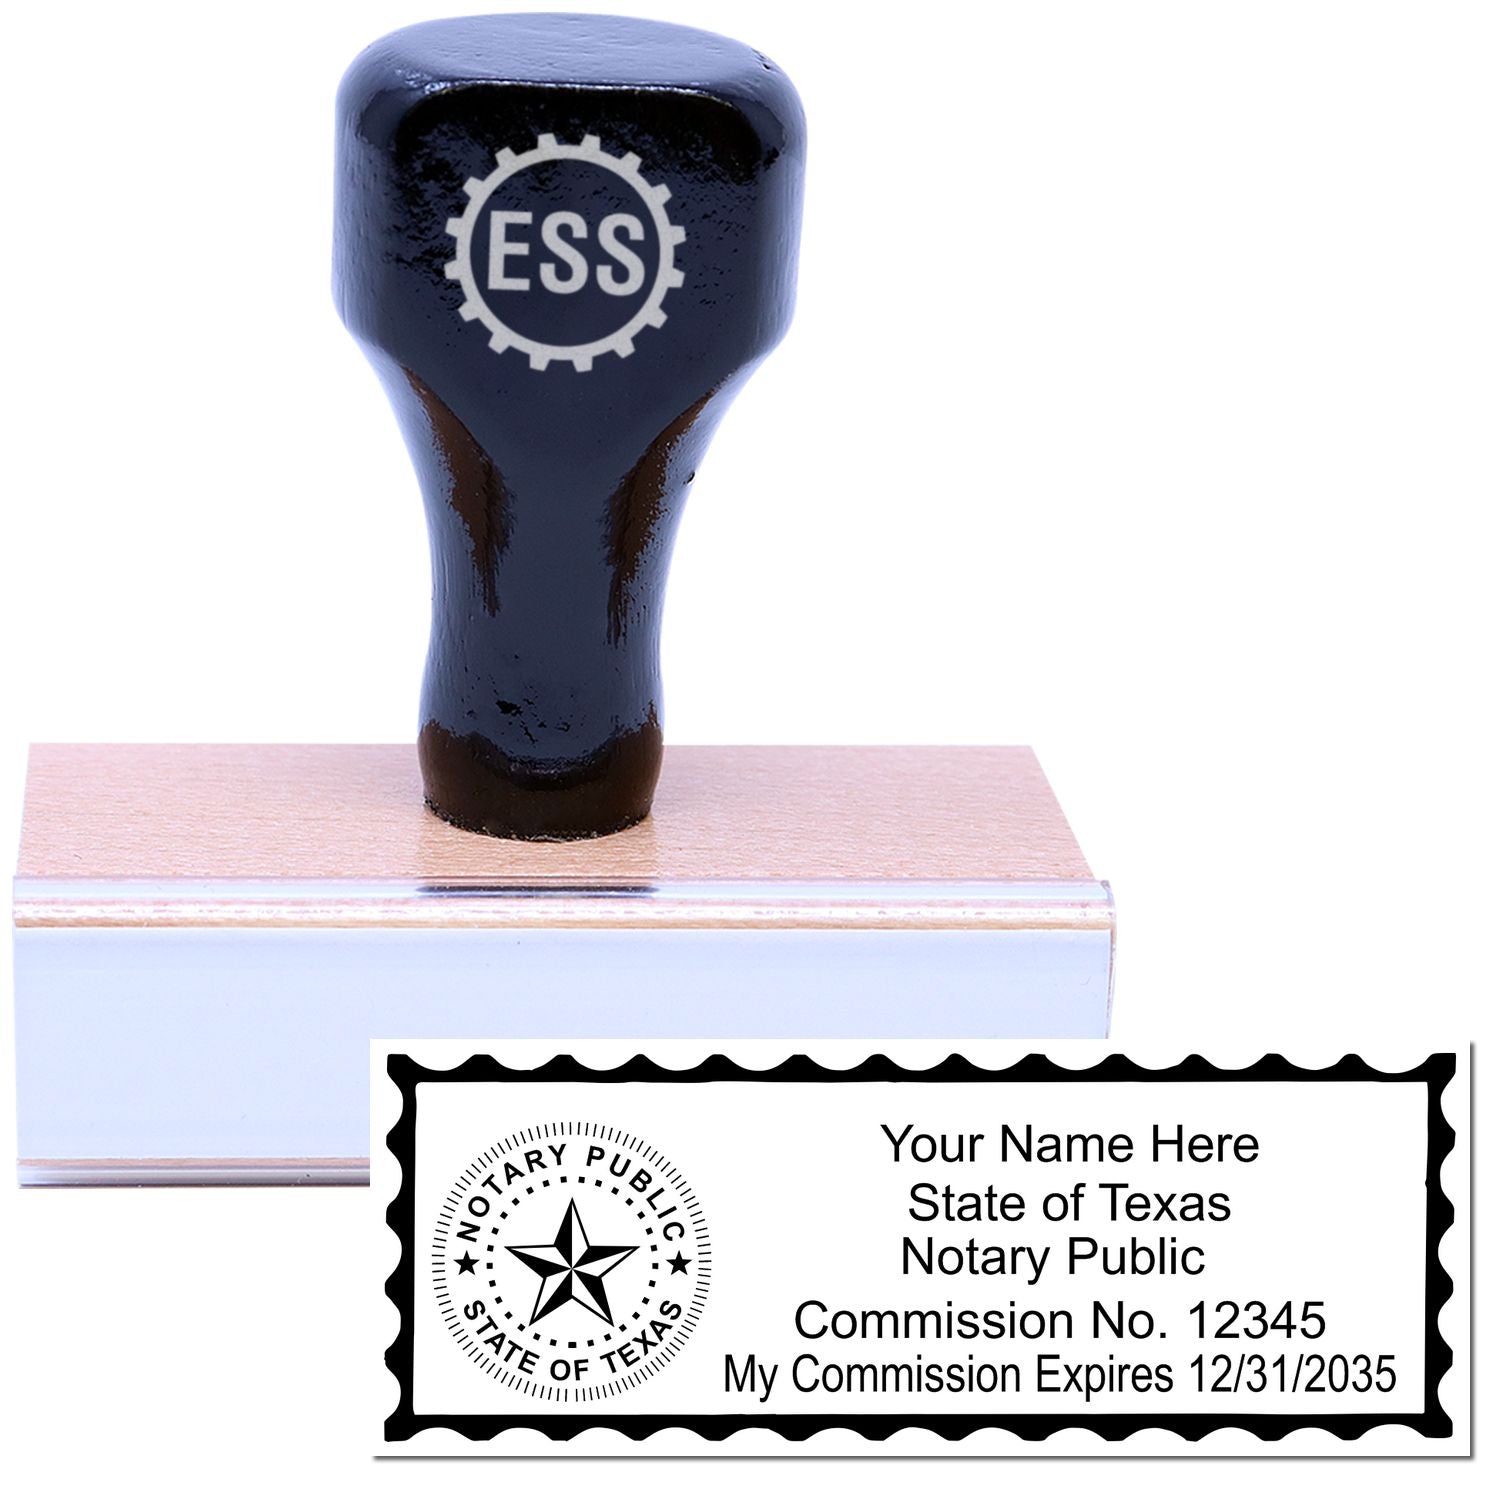 The main image for the Wooden Handle Texas State Seal Notary Public Stamp depicting a sample of the imprint and electronic files